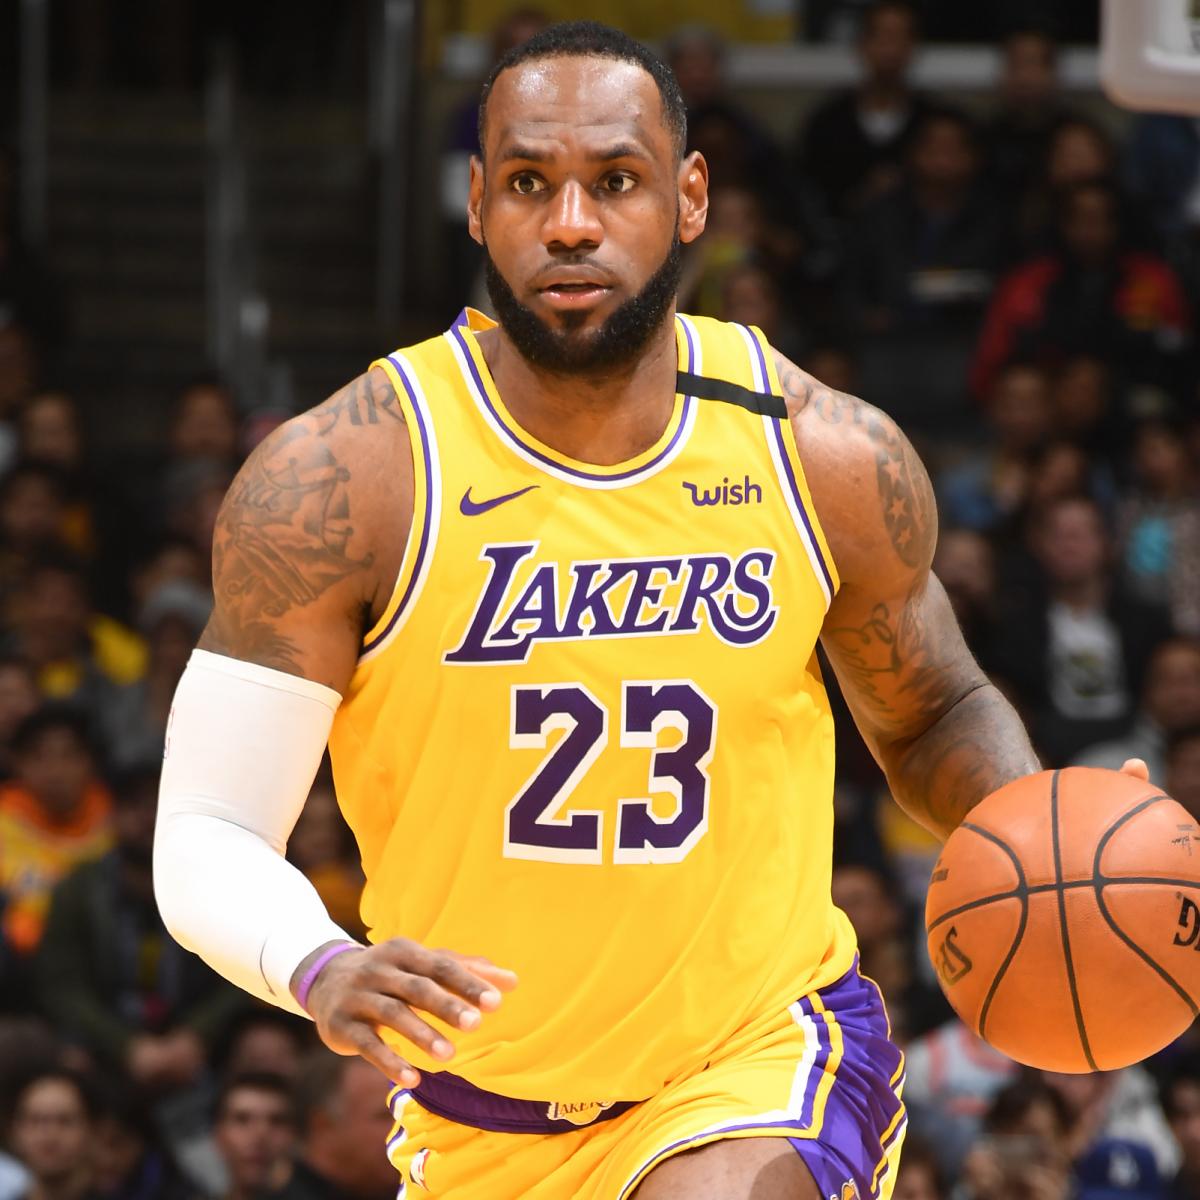 Lakers Lebron James Passes Isiah Thomas For 8th On Nba S All Time Assist List Bleacher Report Latest News Videos And Highlights